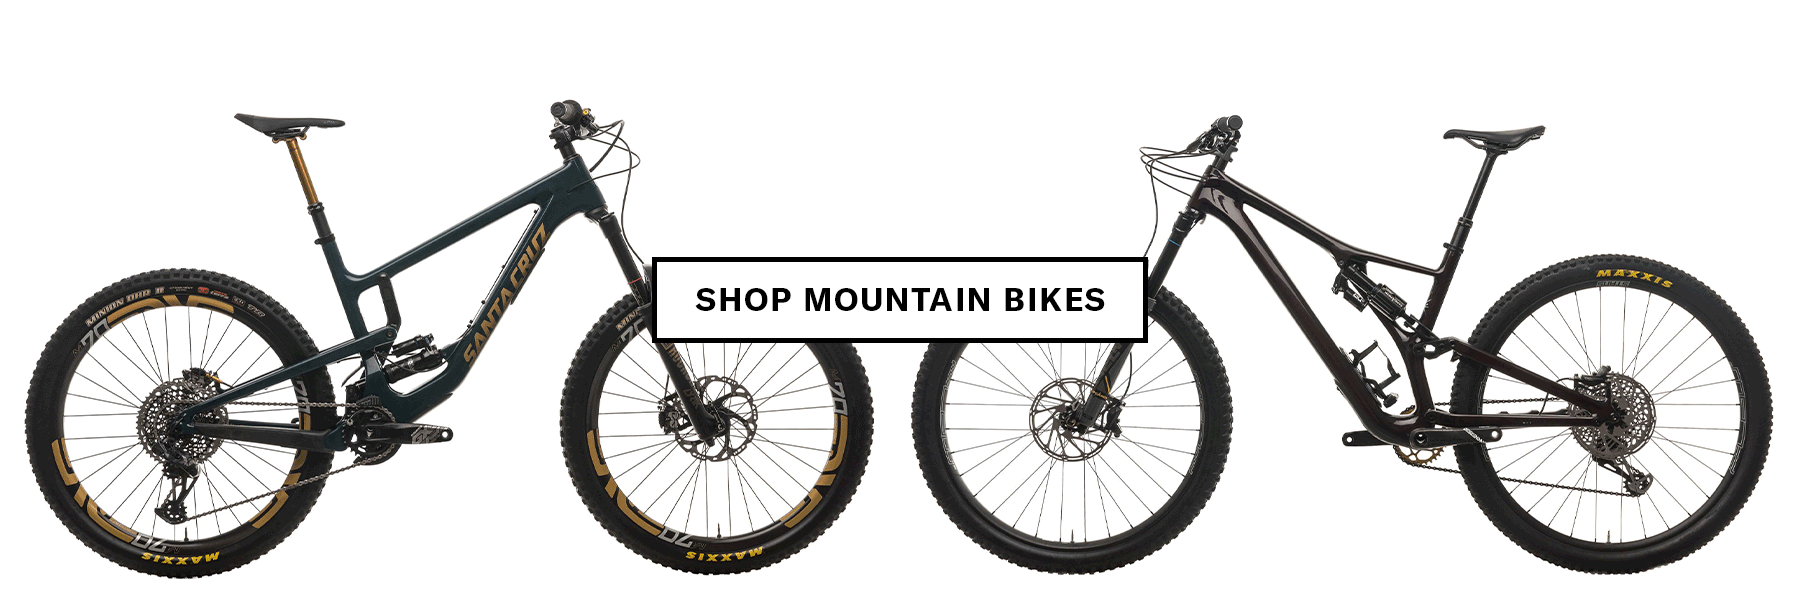 Mountain Bike Buyers Guide How To Buy A Used MTB and Your Best Options The Pros Closet